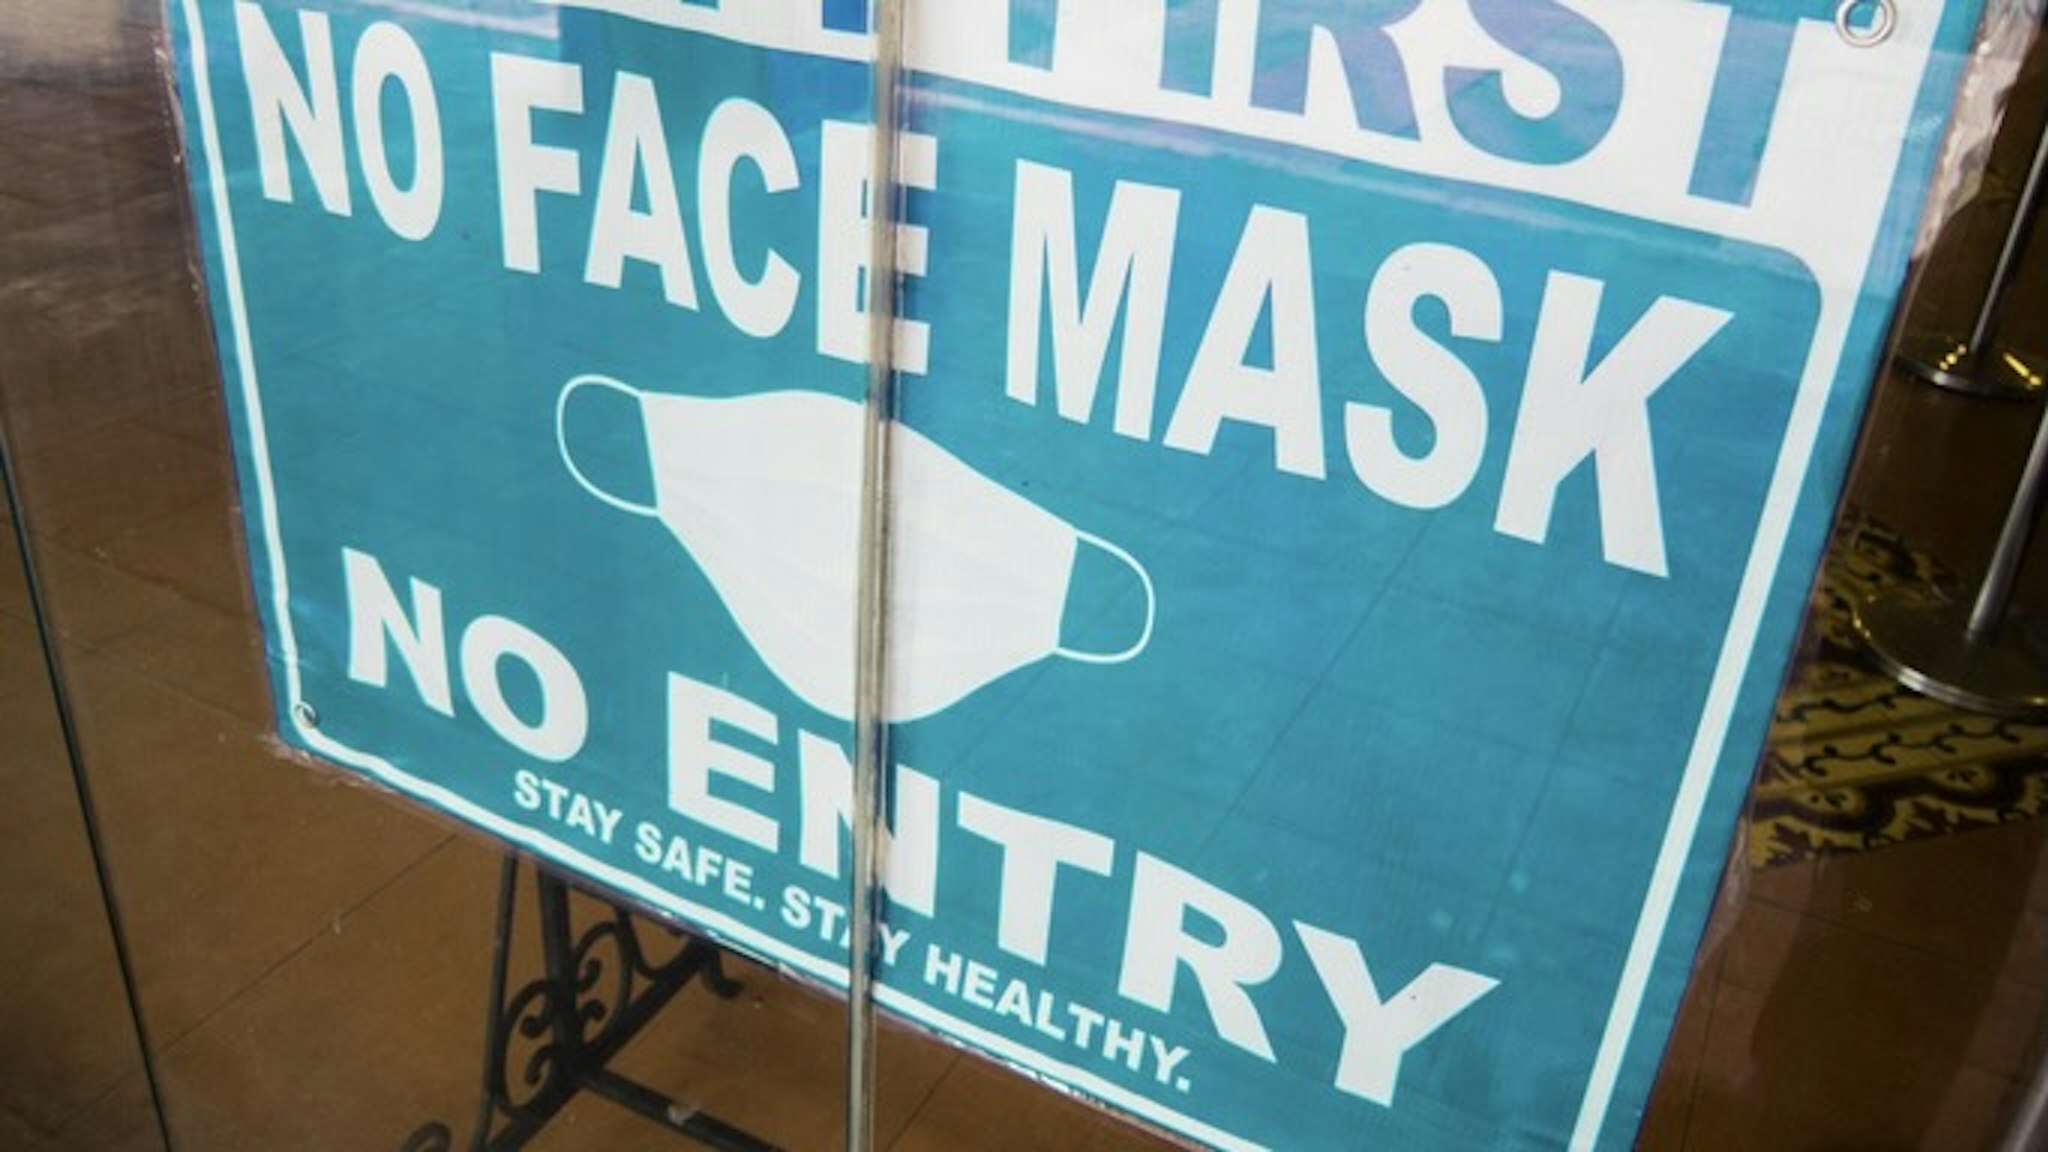 No Mask No Entry sign in a store window - stock photo Close-up view of No Mask No Entry sign in a store window amidst Coronavirus Pandemic Karl Tapales via Getty Images